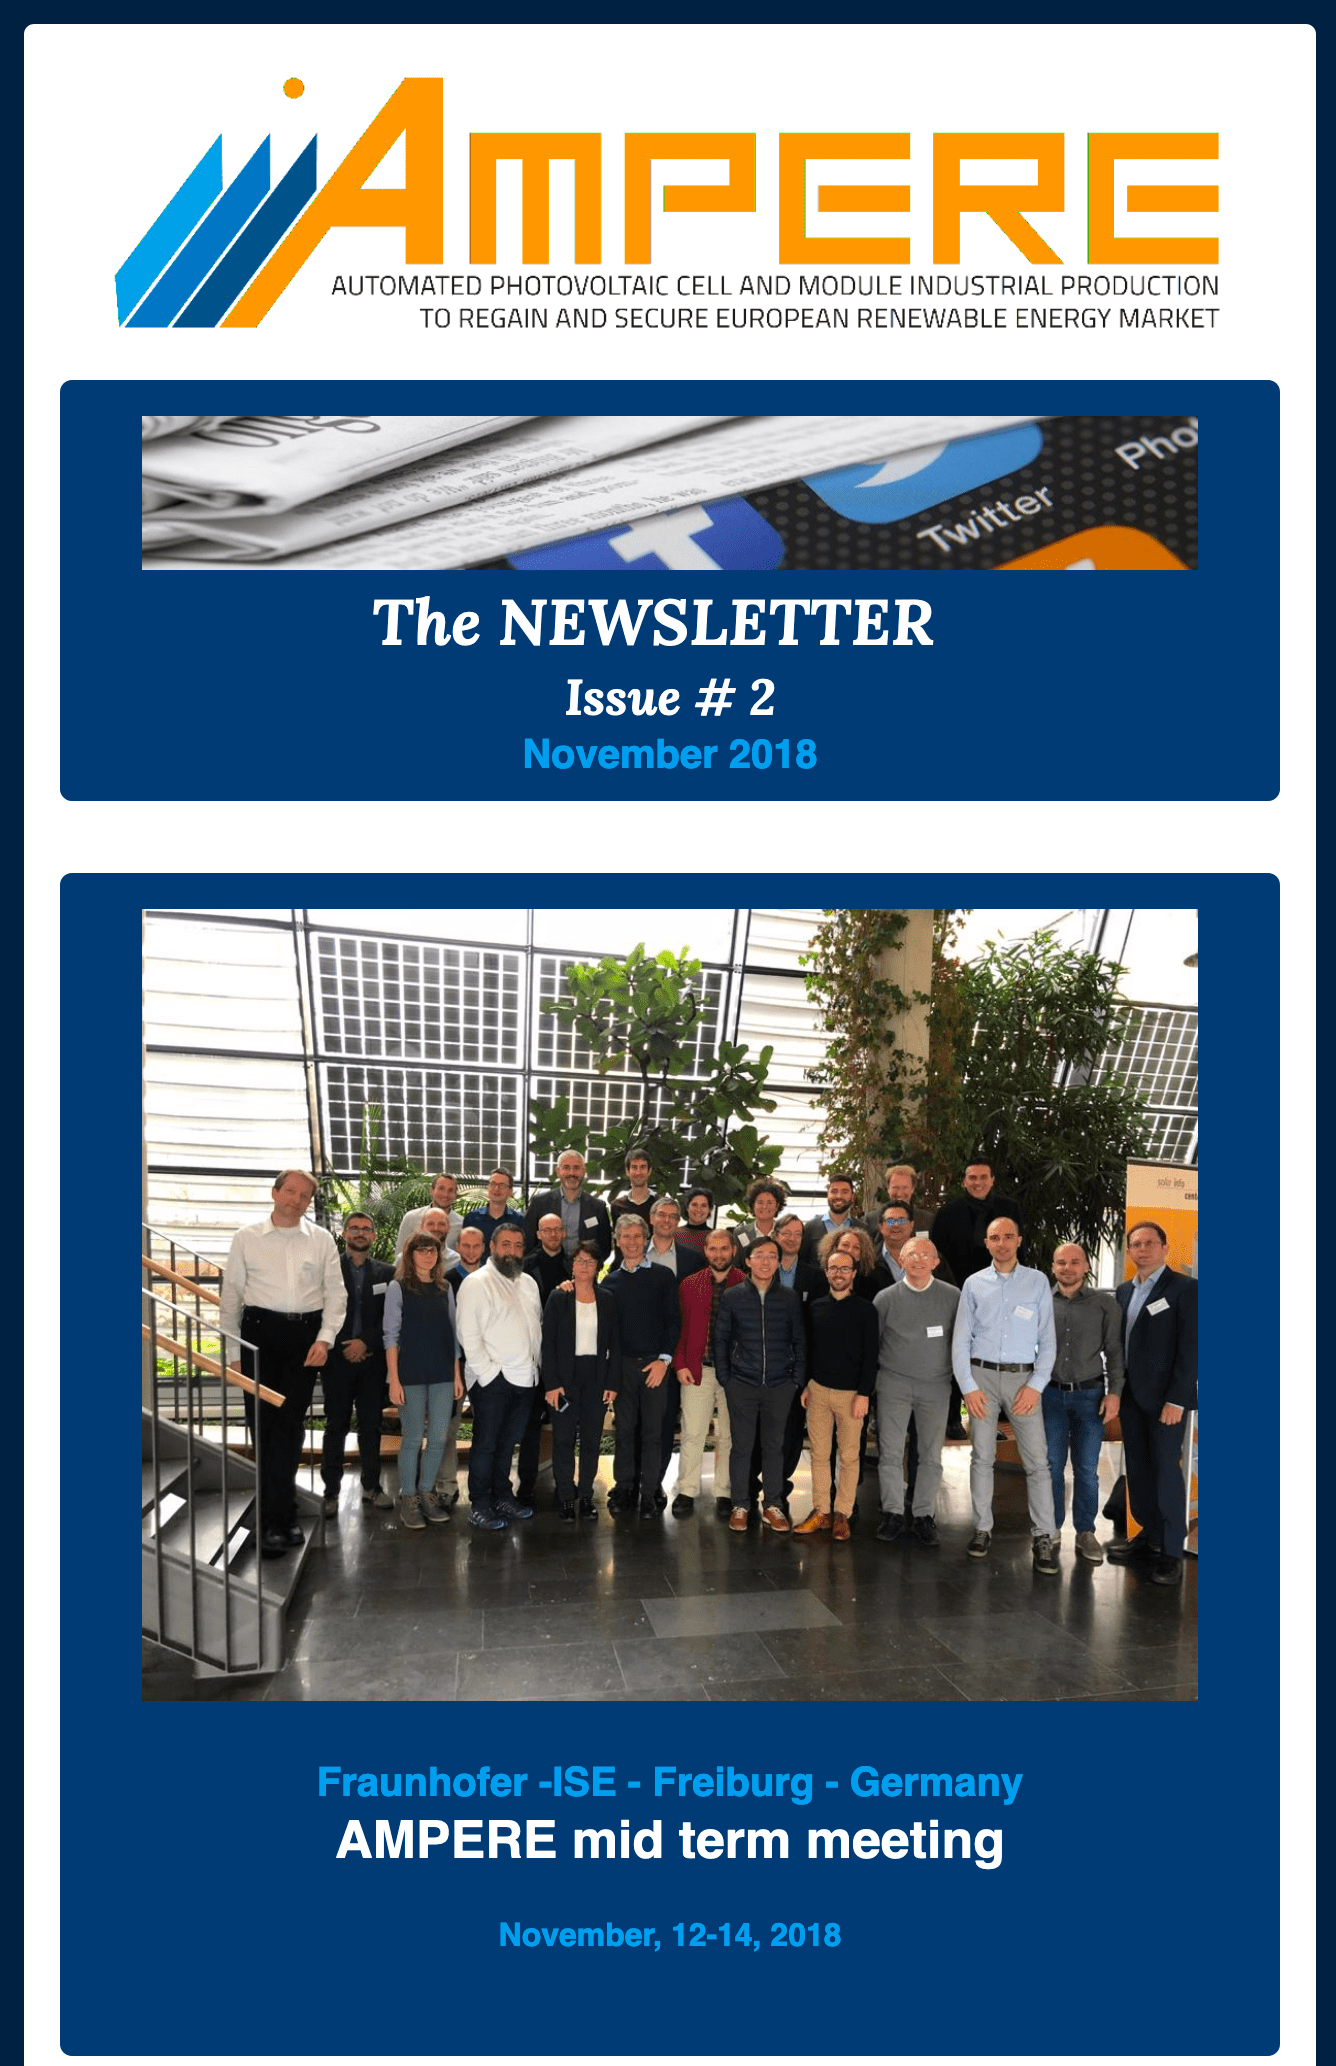 AMPERE NEWSLETTER: II Edition